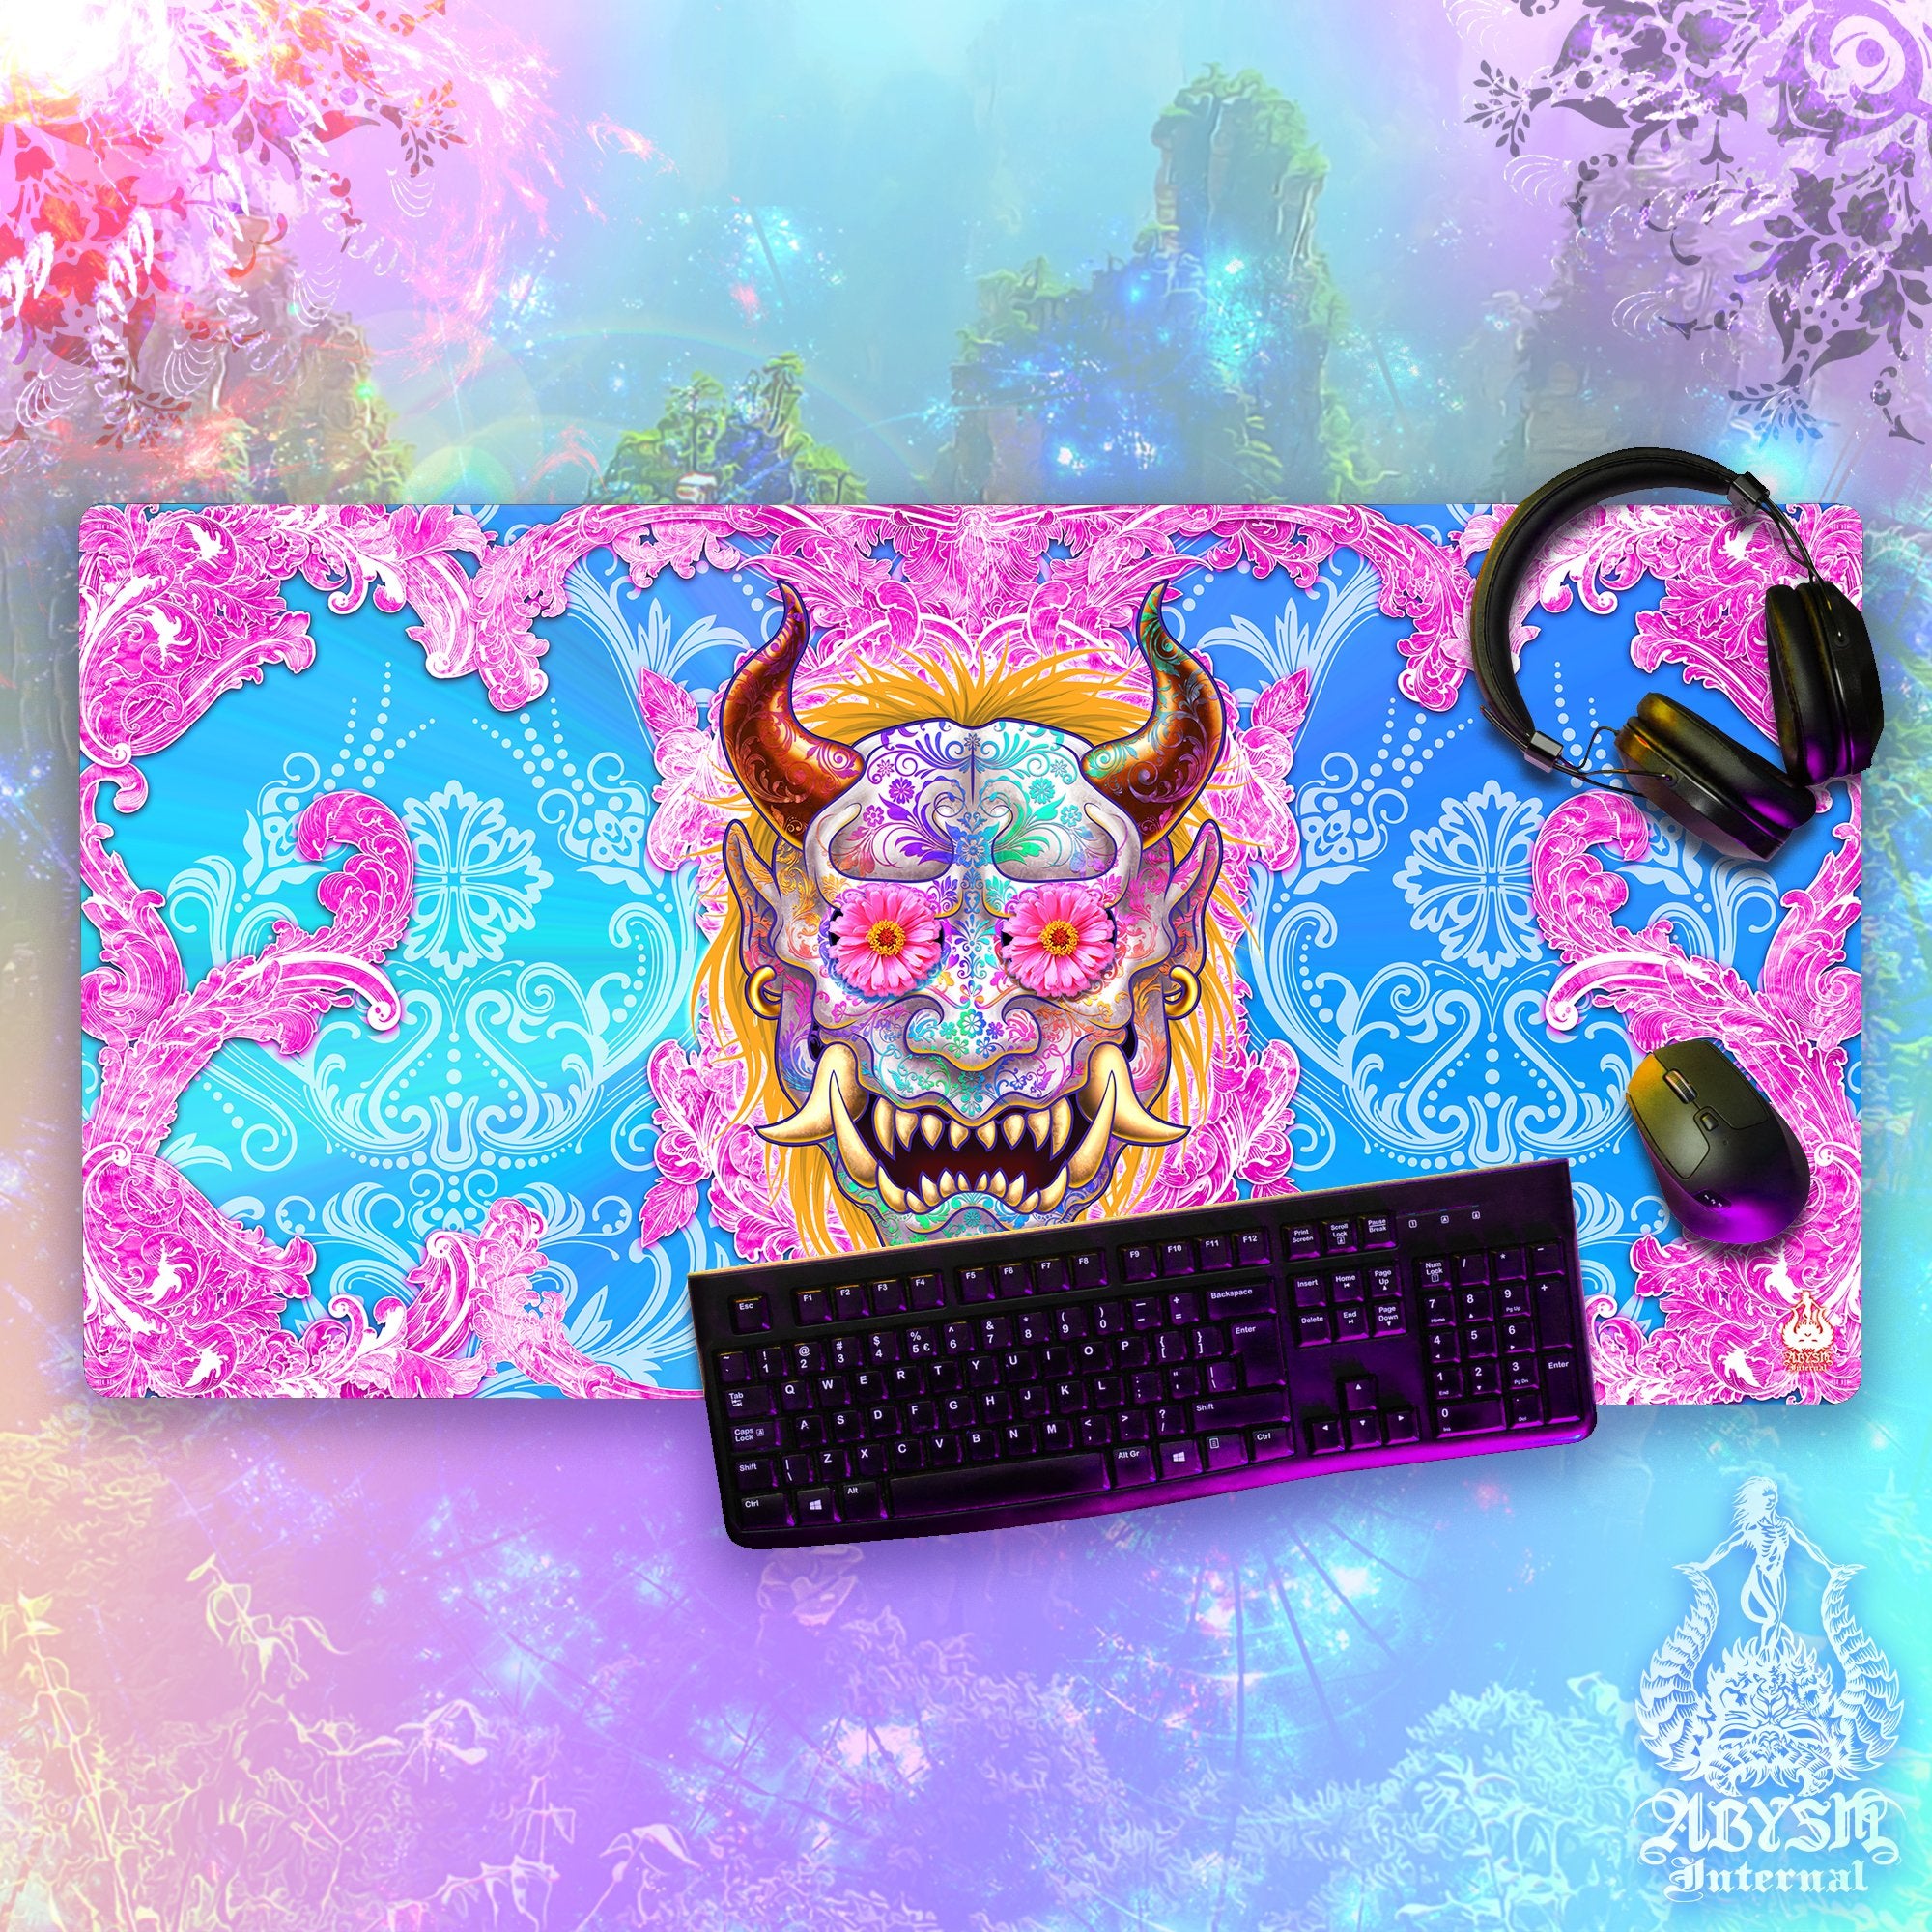 Japanese Demon Workpad, Pastel Oni Desk Mat, Psychedelic Gaming Mouse Pad, Gamer Table Protector Cover, Aesthetic Manga Yokai Art Print - Psy, 2 Colors - Abysm Internal